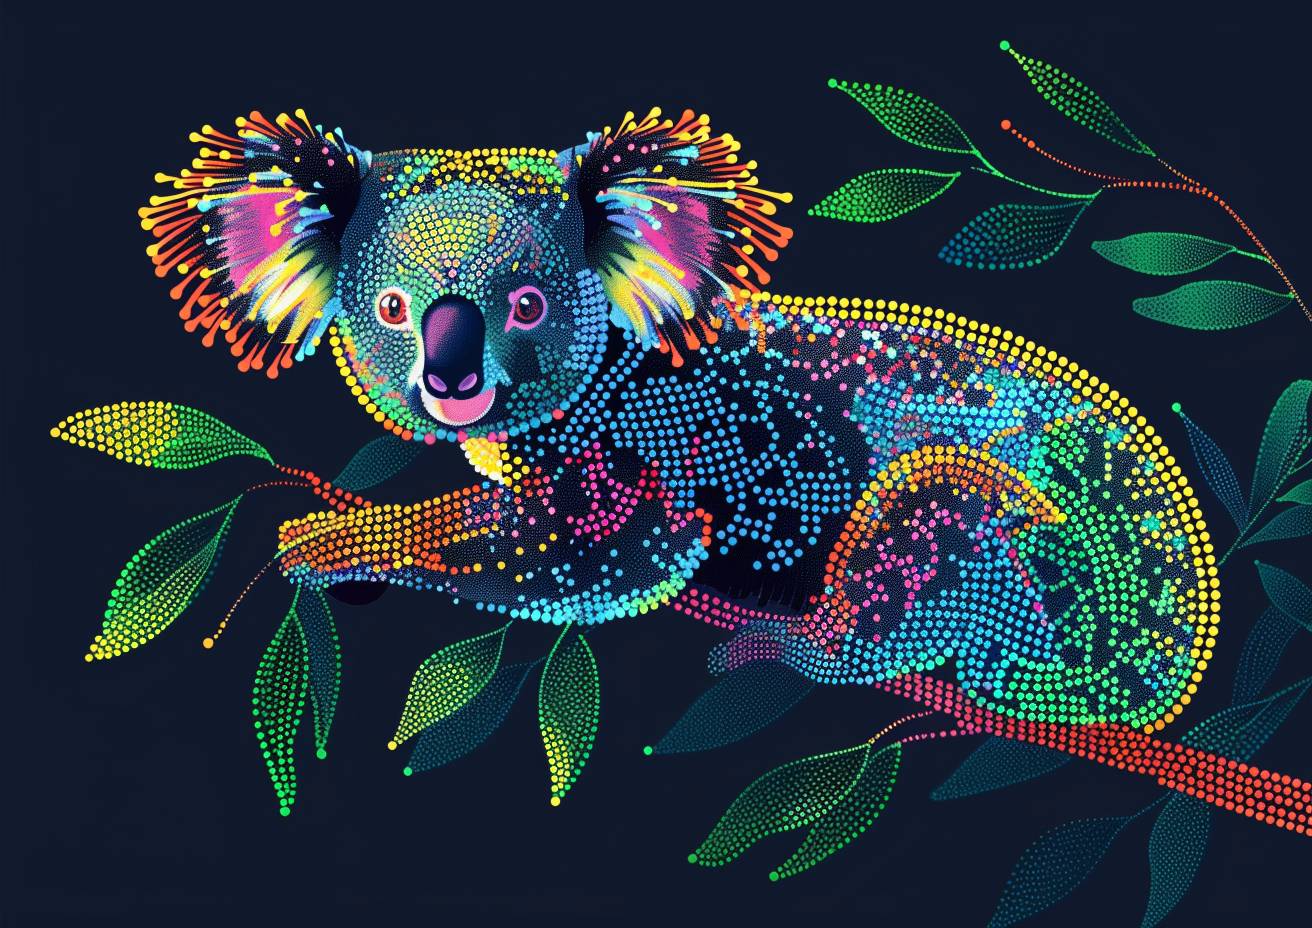 A vector illustration on a blank canvas, using green, pink, orange, and blue phosphor dots of varying sizes, forming a koala bear in a gum tree, eucalyptus leaves, negative space